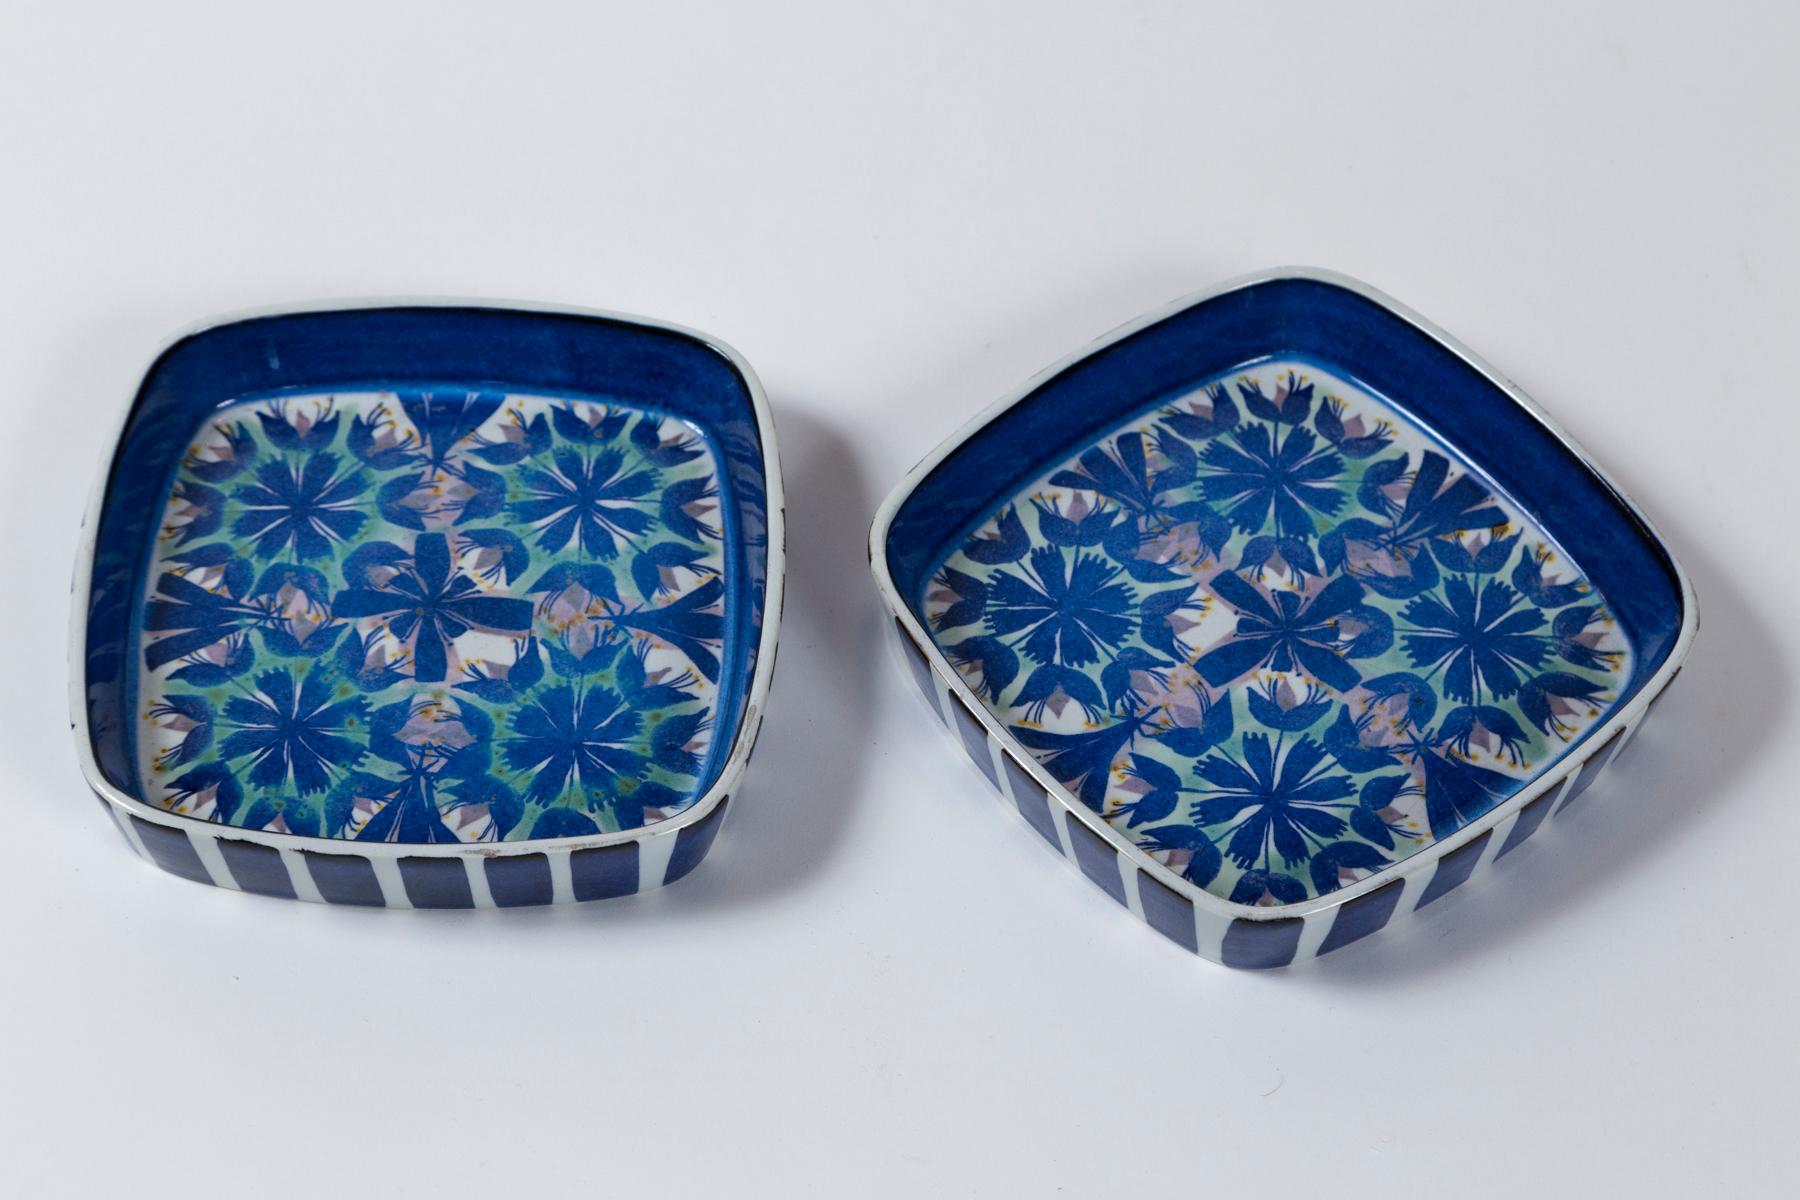 Pair Royal Copenhagen plates designed by Marianne Johnson, Denmark, circa 1950. An abstract floral design in richly glazed shades of blue. Signed 'MJ' by the artist and marked for Royal Copenhagen.